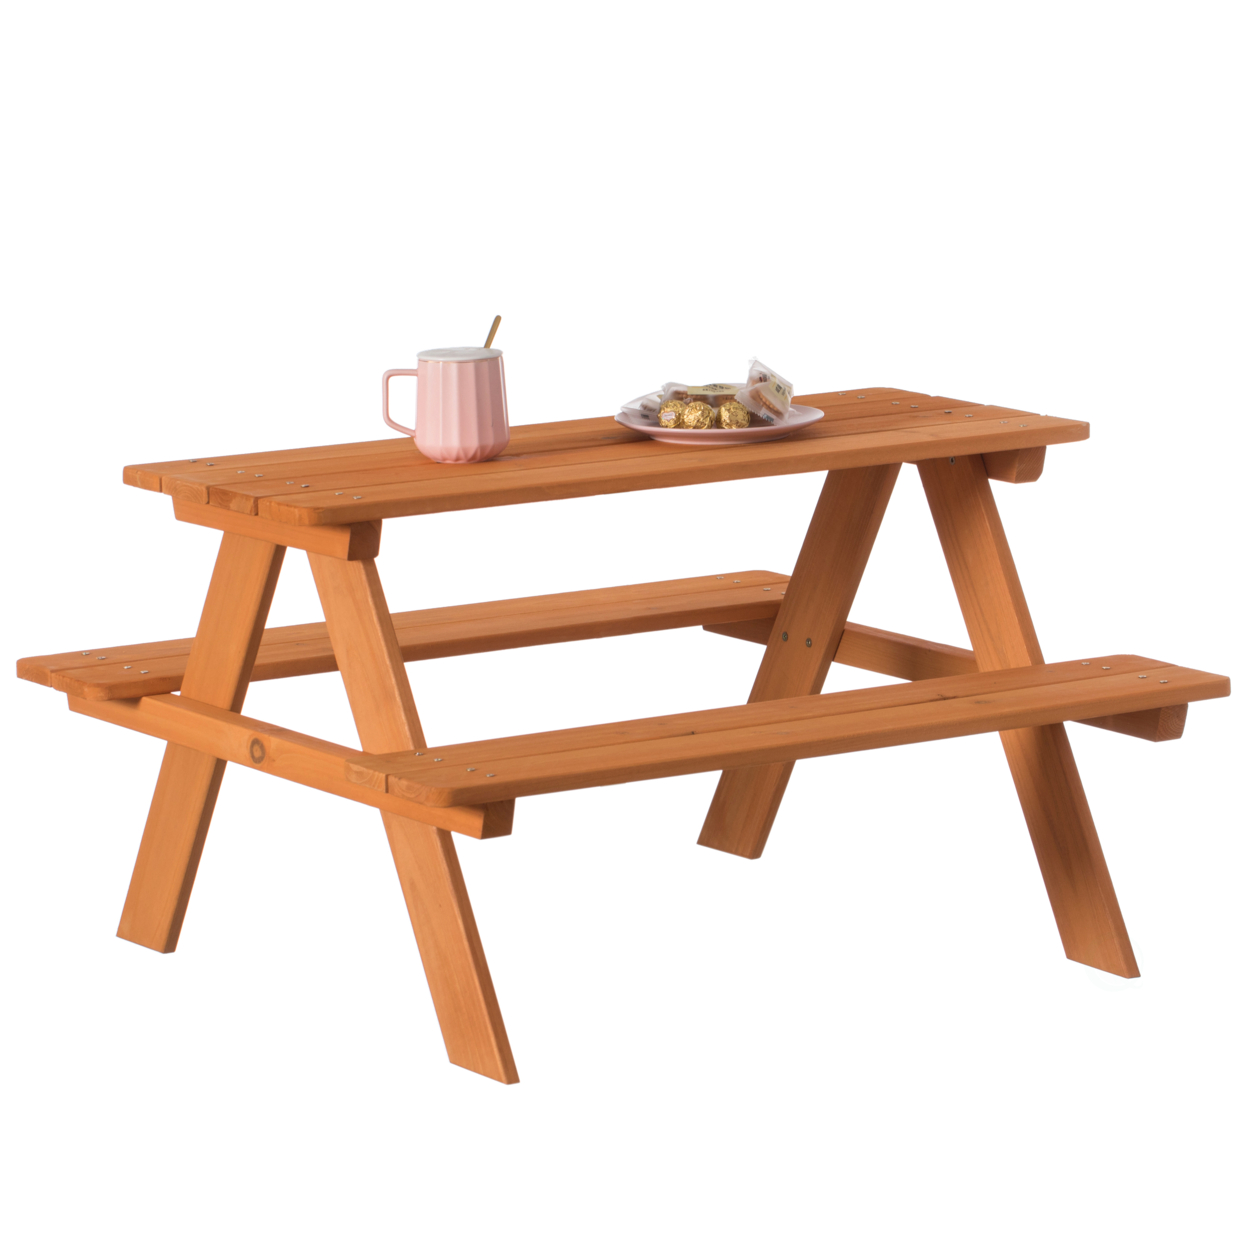 Wooden Kids Outdoor Picnic Table For Garden And Backyard, Stained